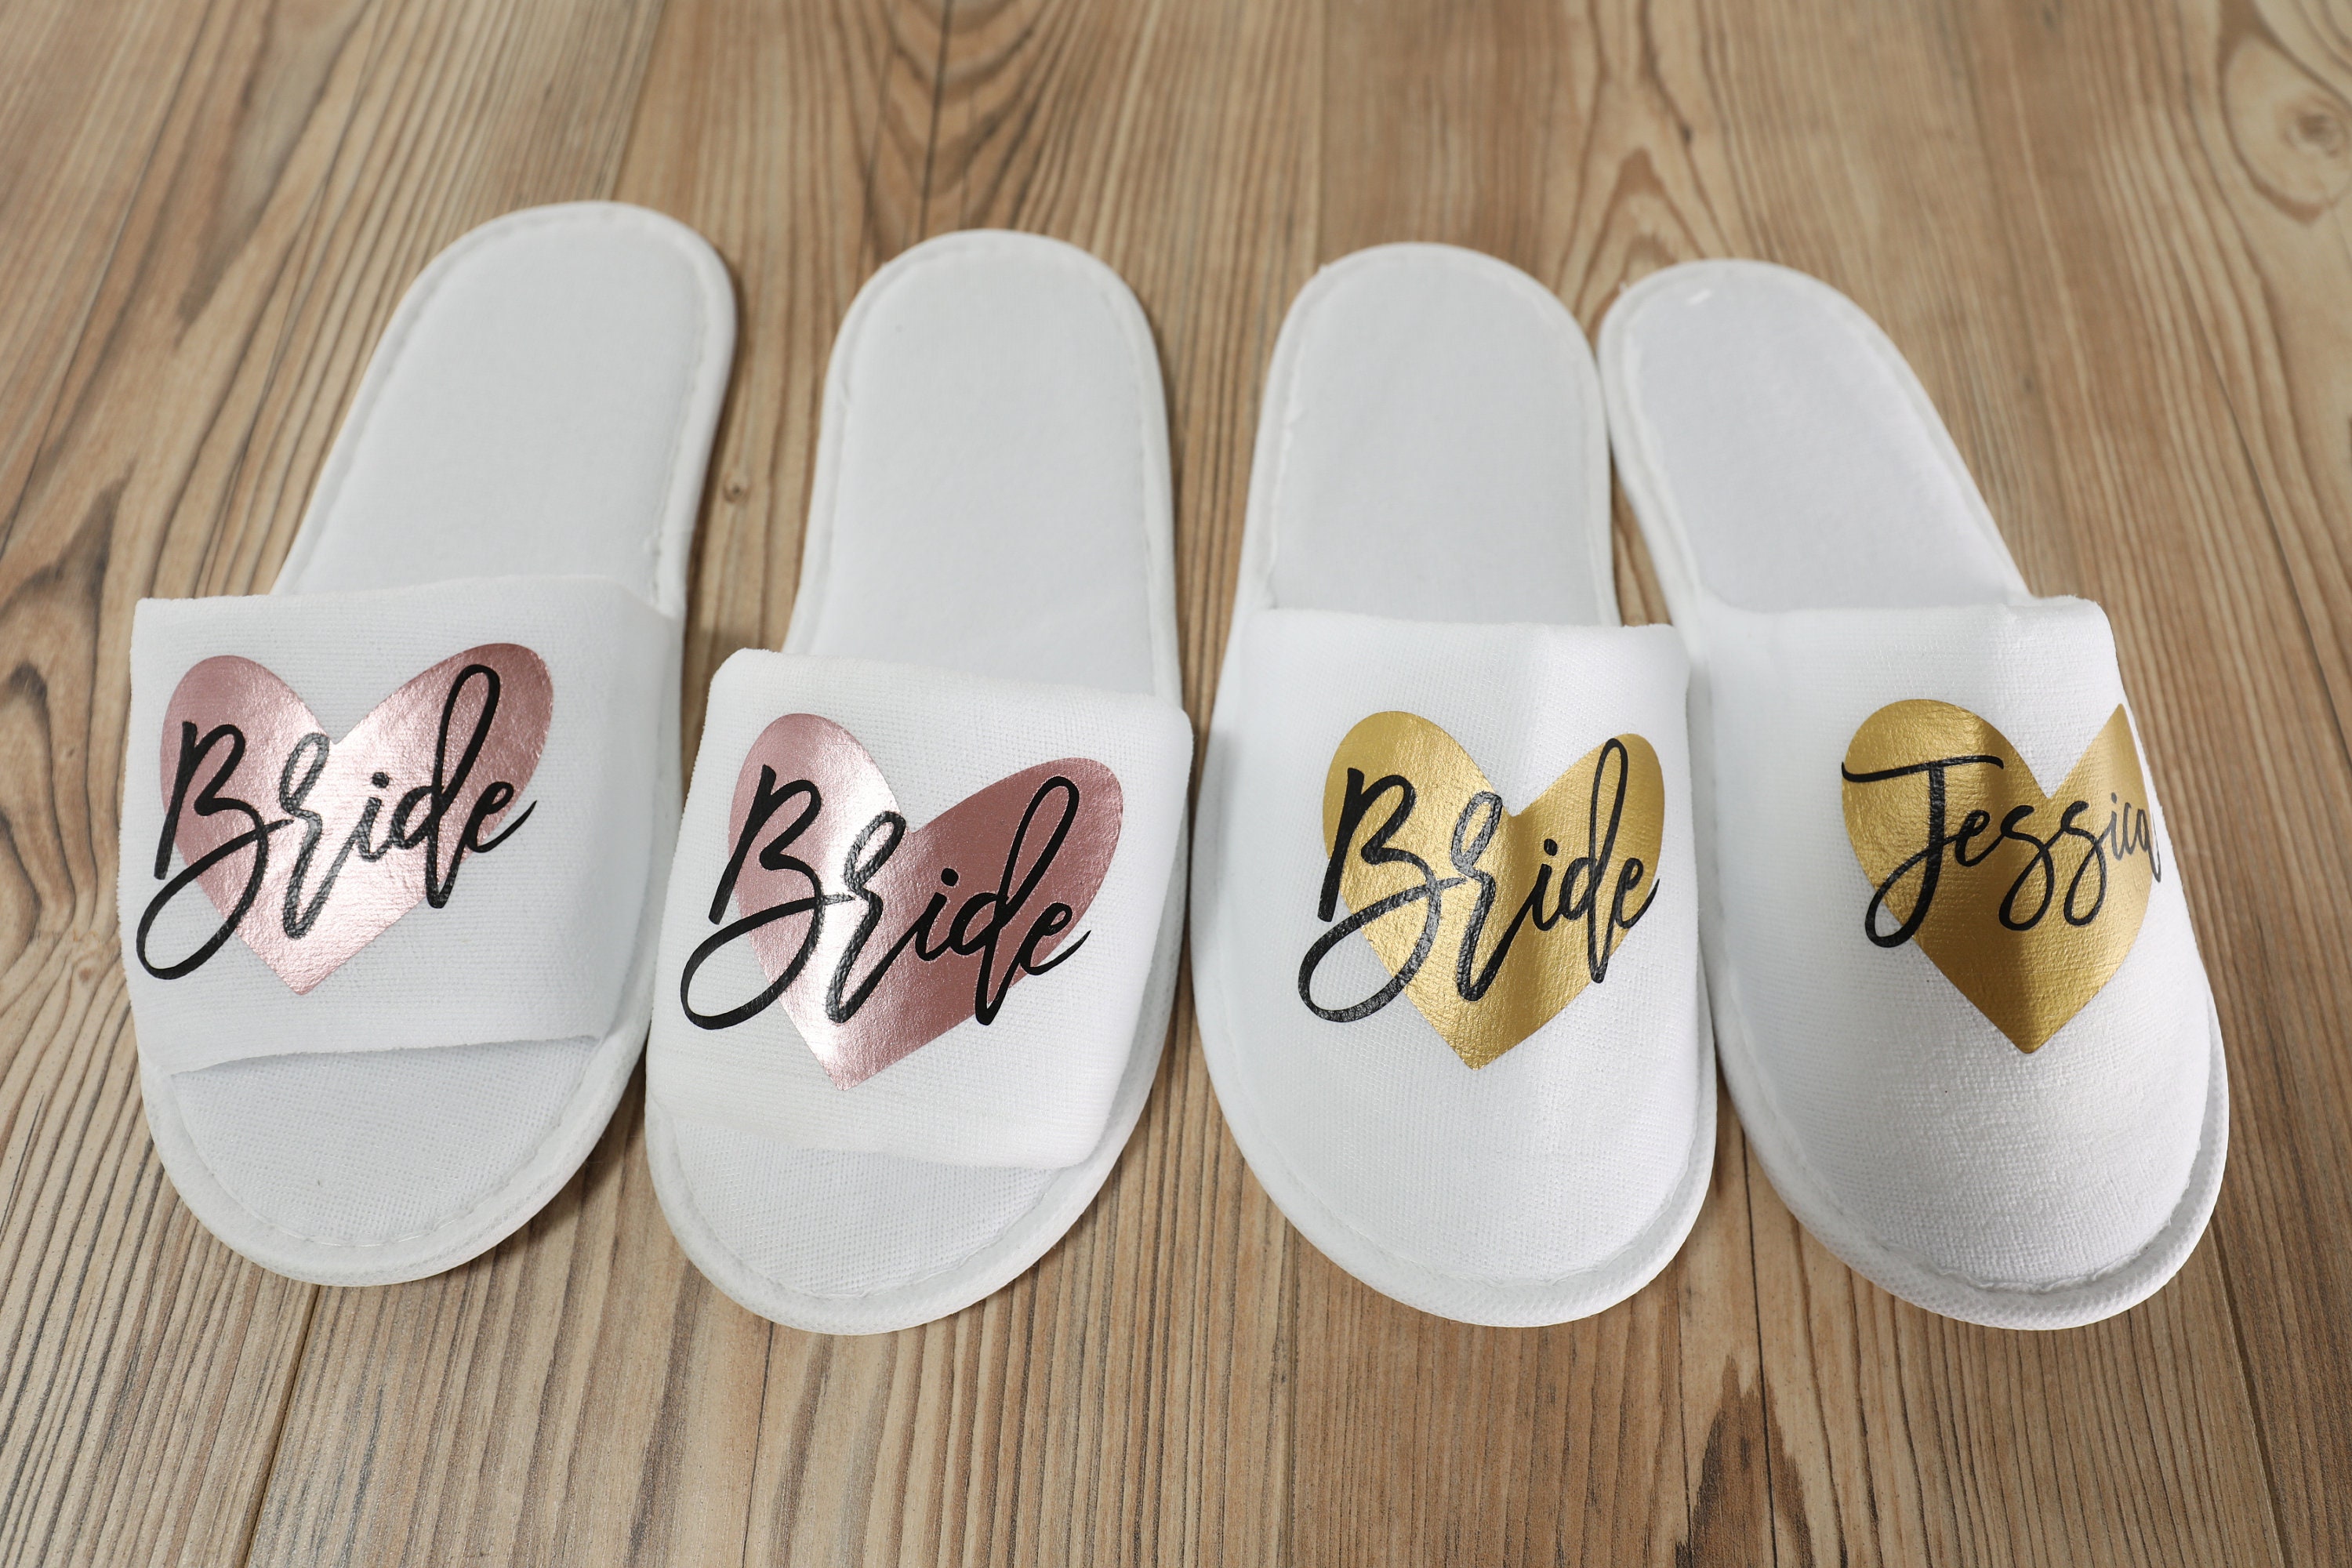 bridal slippers slippers hen do slippers bridesmaid slippers Children slippers mens slippers Wedding slippers personalised slippers Weddings Gifts & Mementos Bridesmaids Gifts 